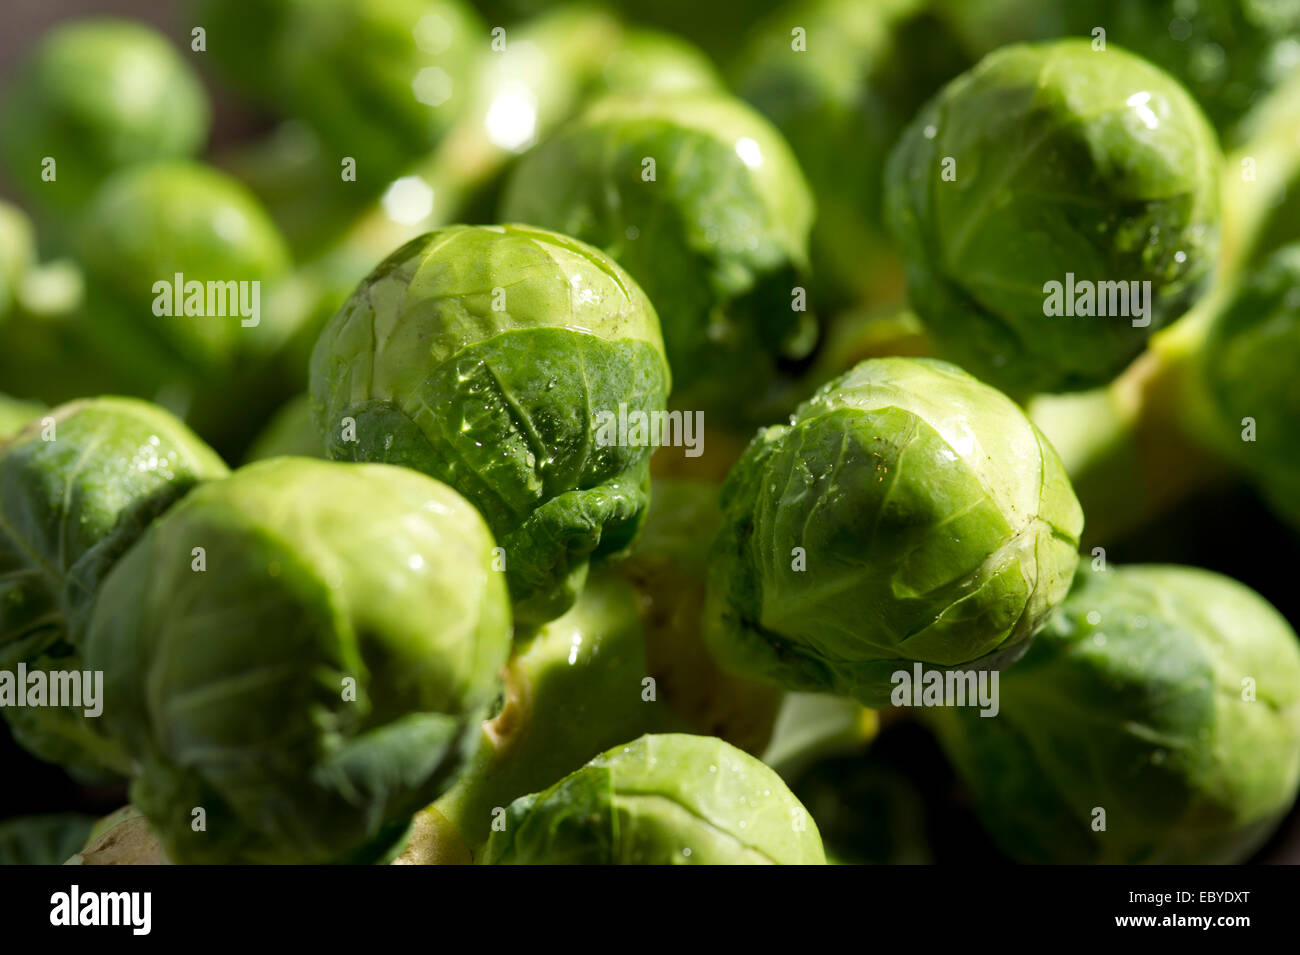 Brussels sprouts and dishes. Stock Photo